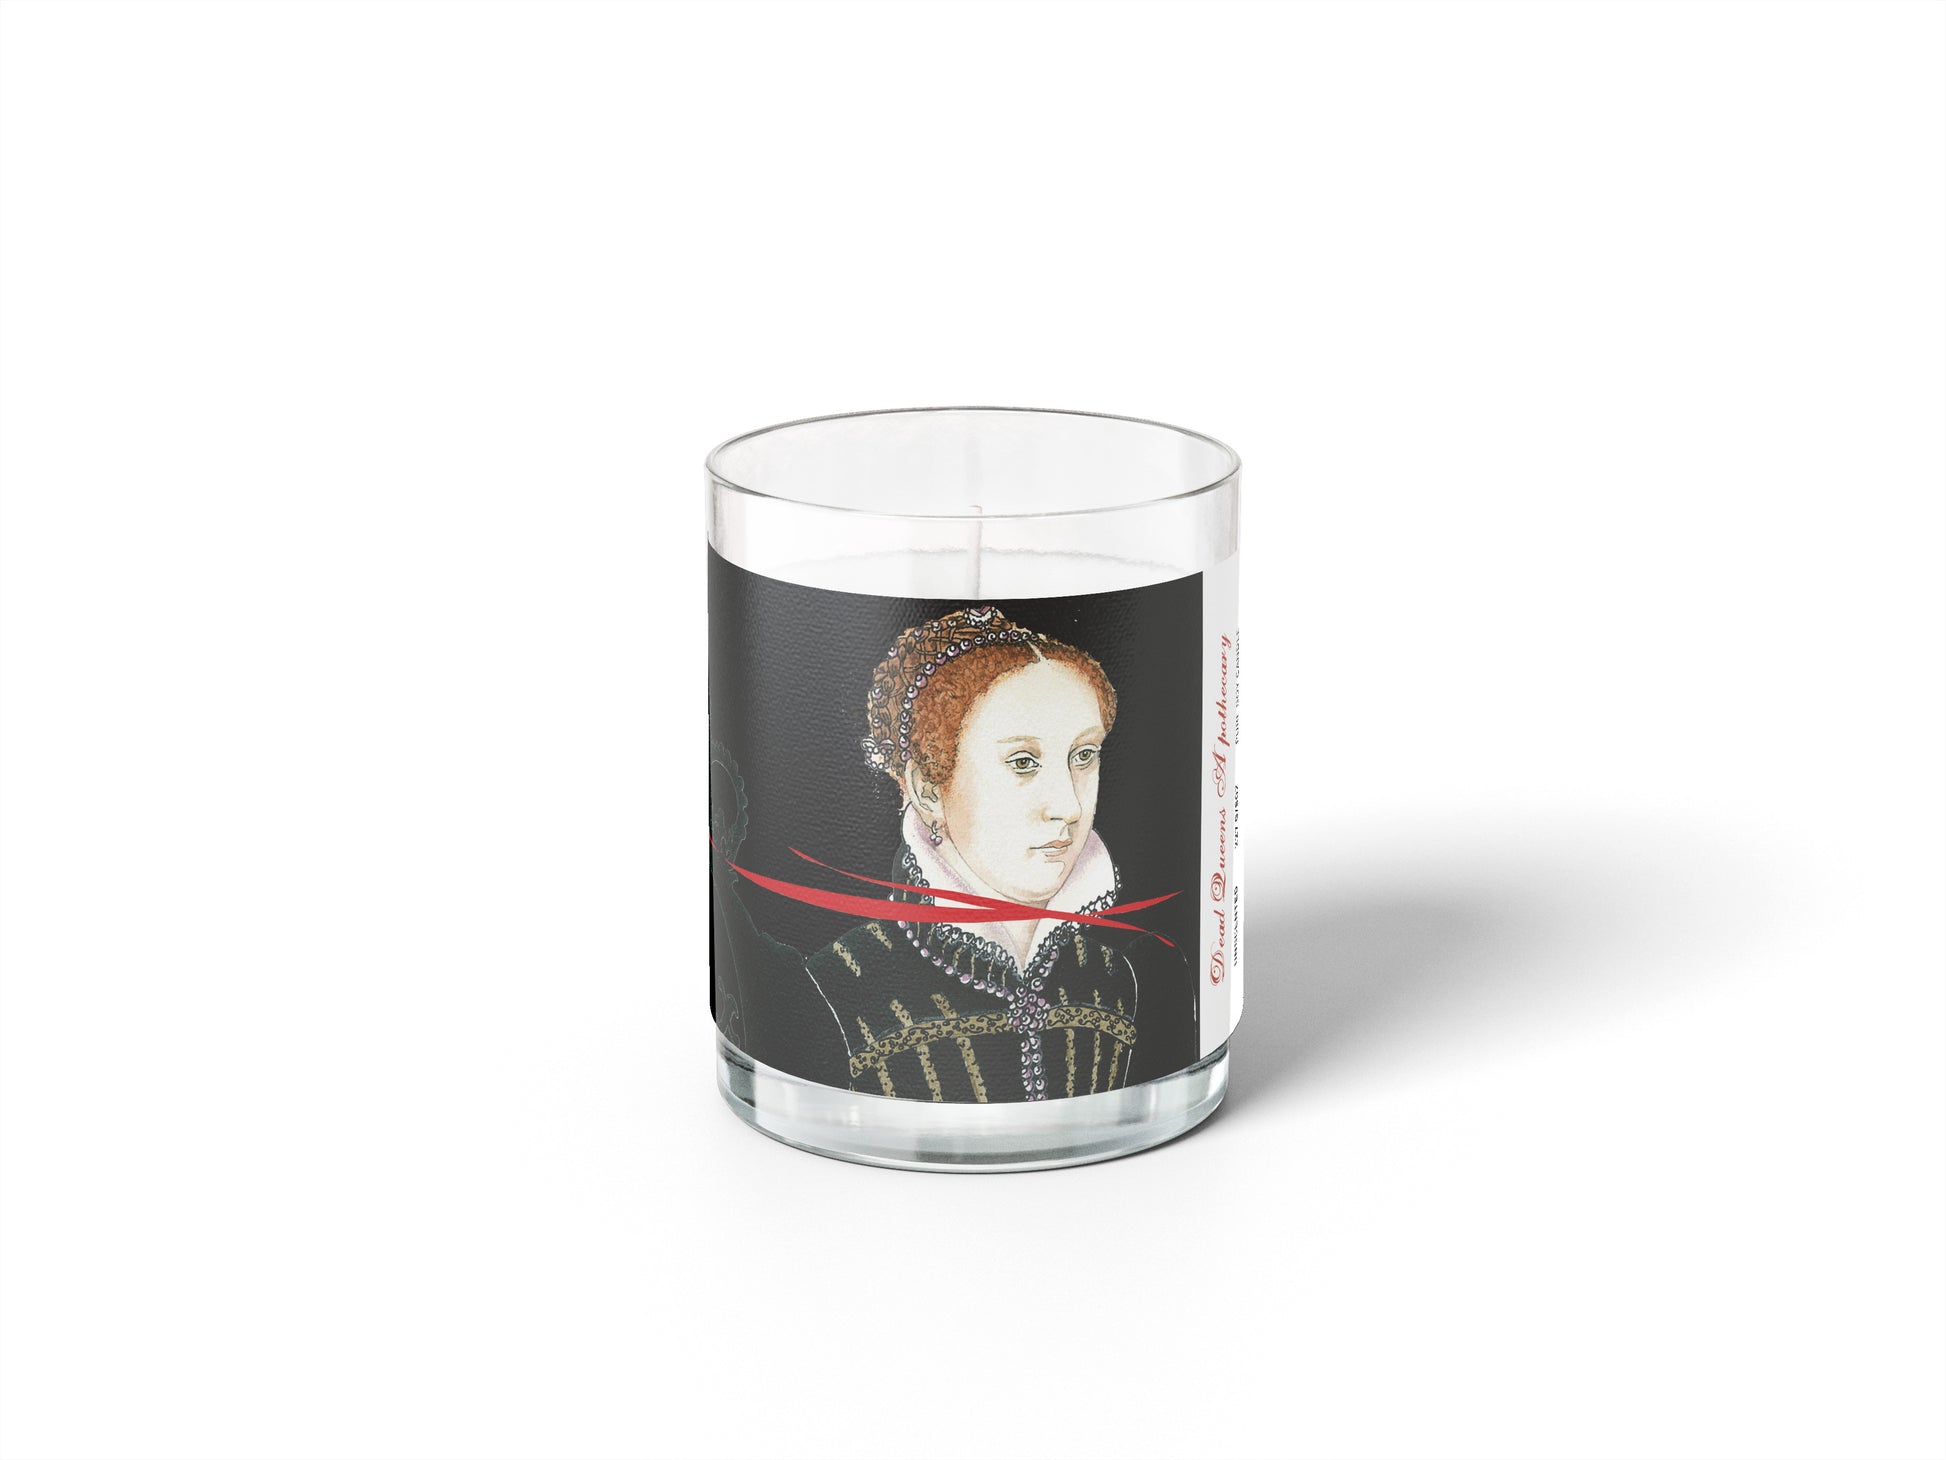 Mary Queen of Scots English Rose Candle - Dead Queens Apothecary